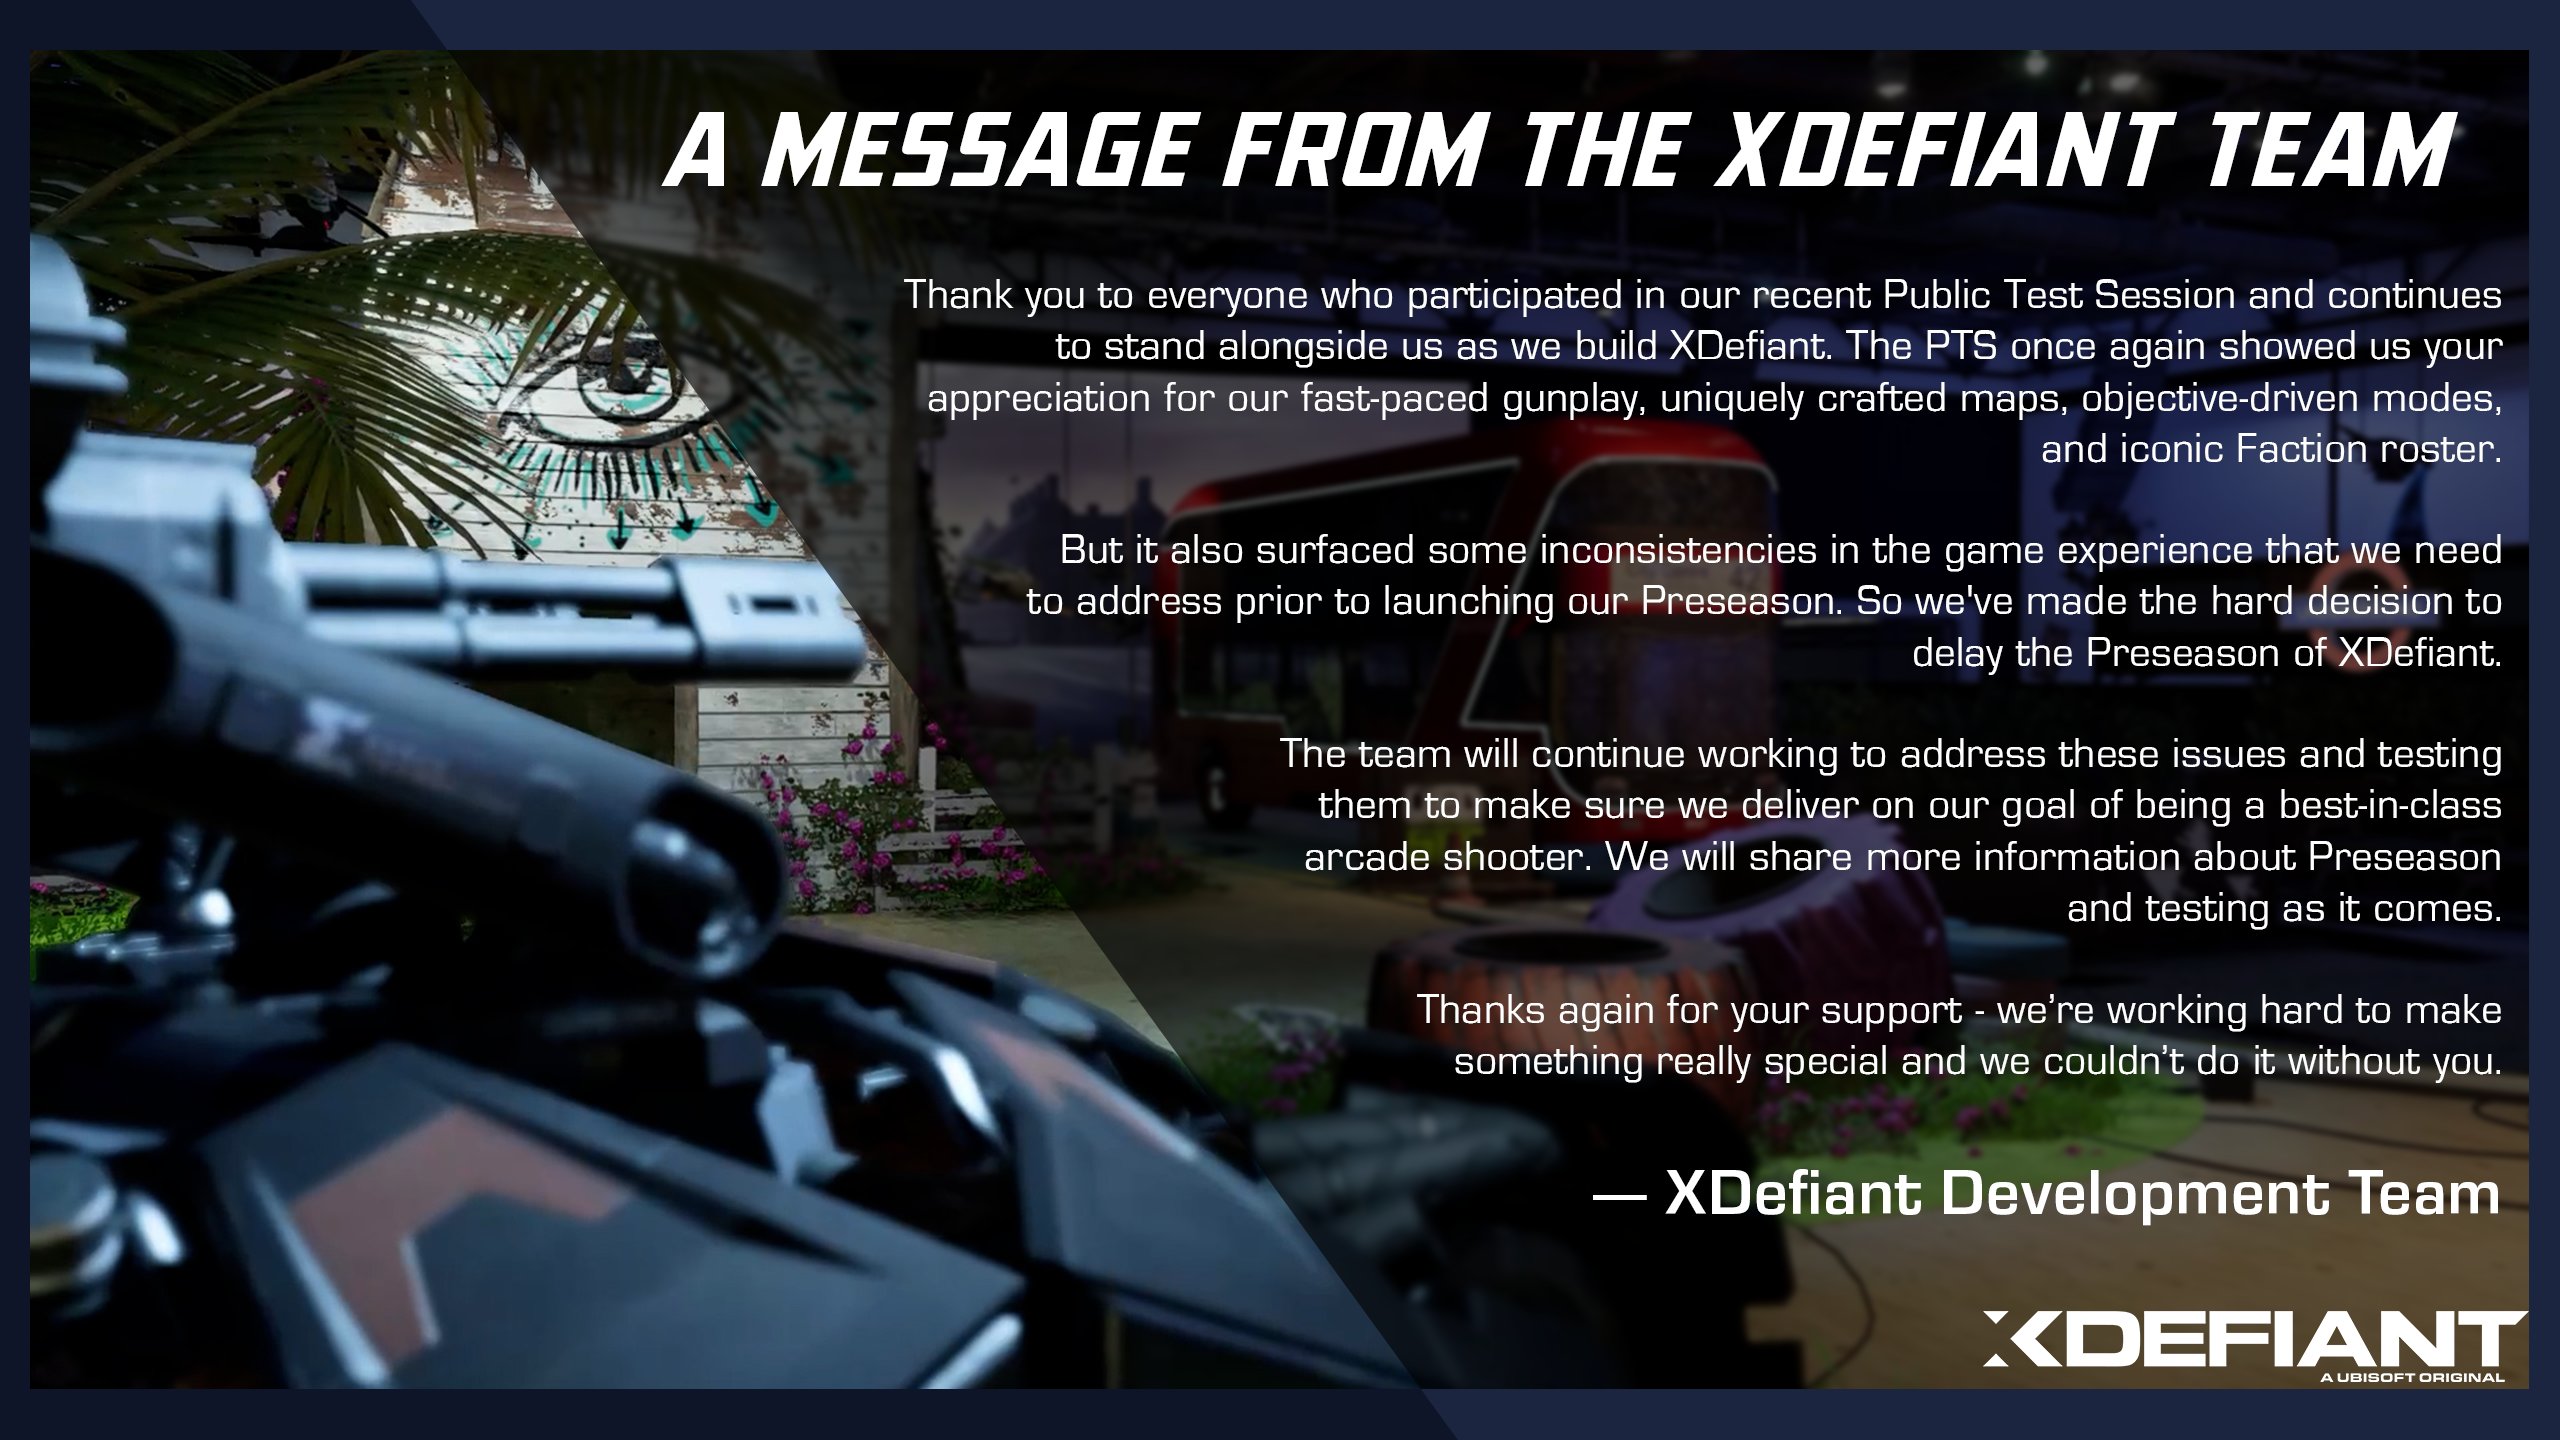 XDEFIENT is a new free to play FPS coming out in 2023 on all platforms